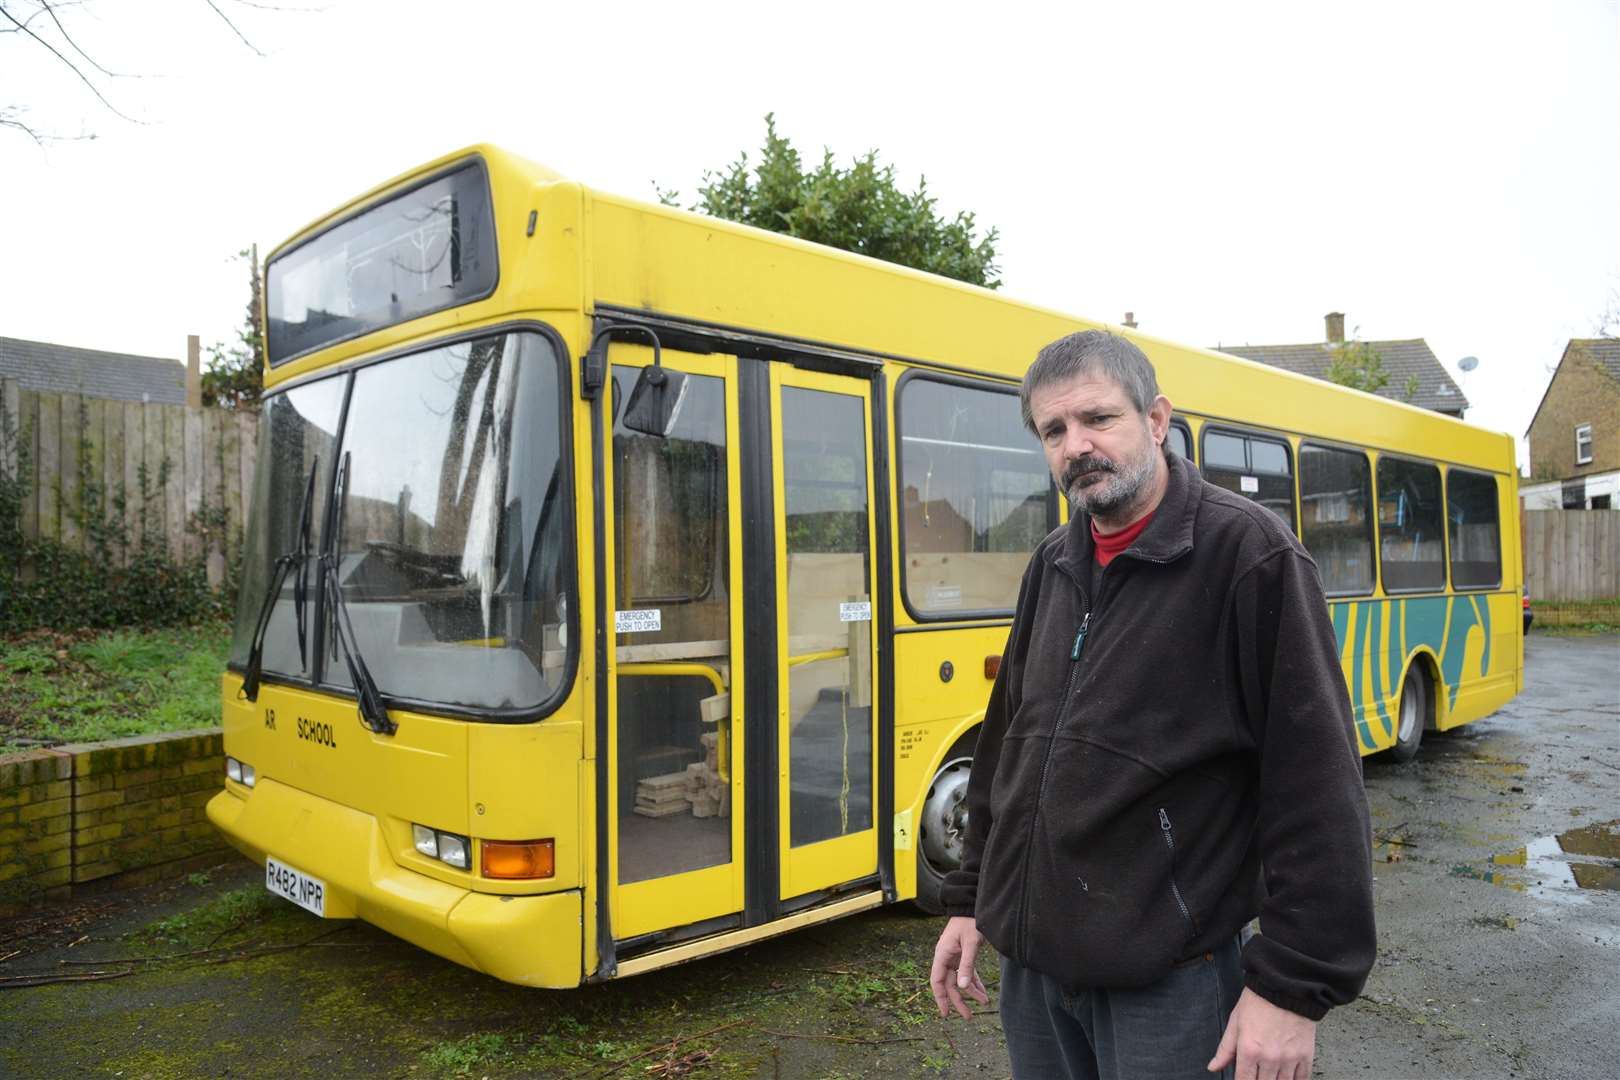 Tony Cooper converted an old single decker school bus in to a mobile homeless shelter. Picture: Gary Browne